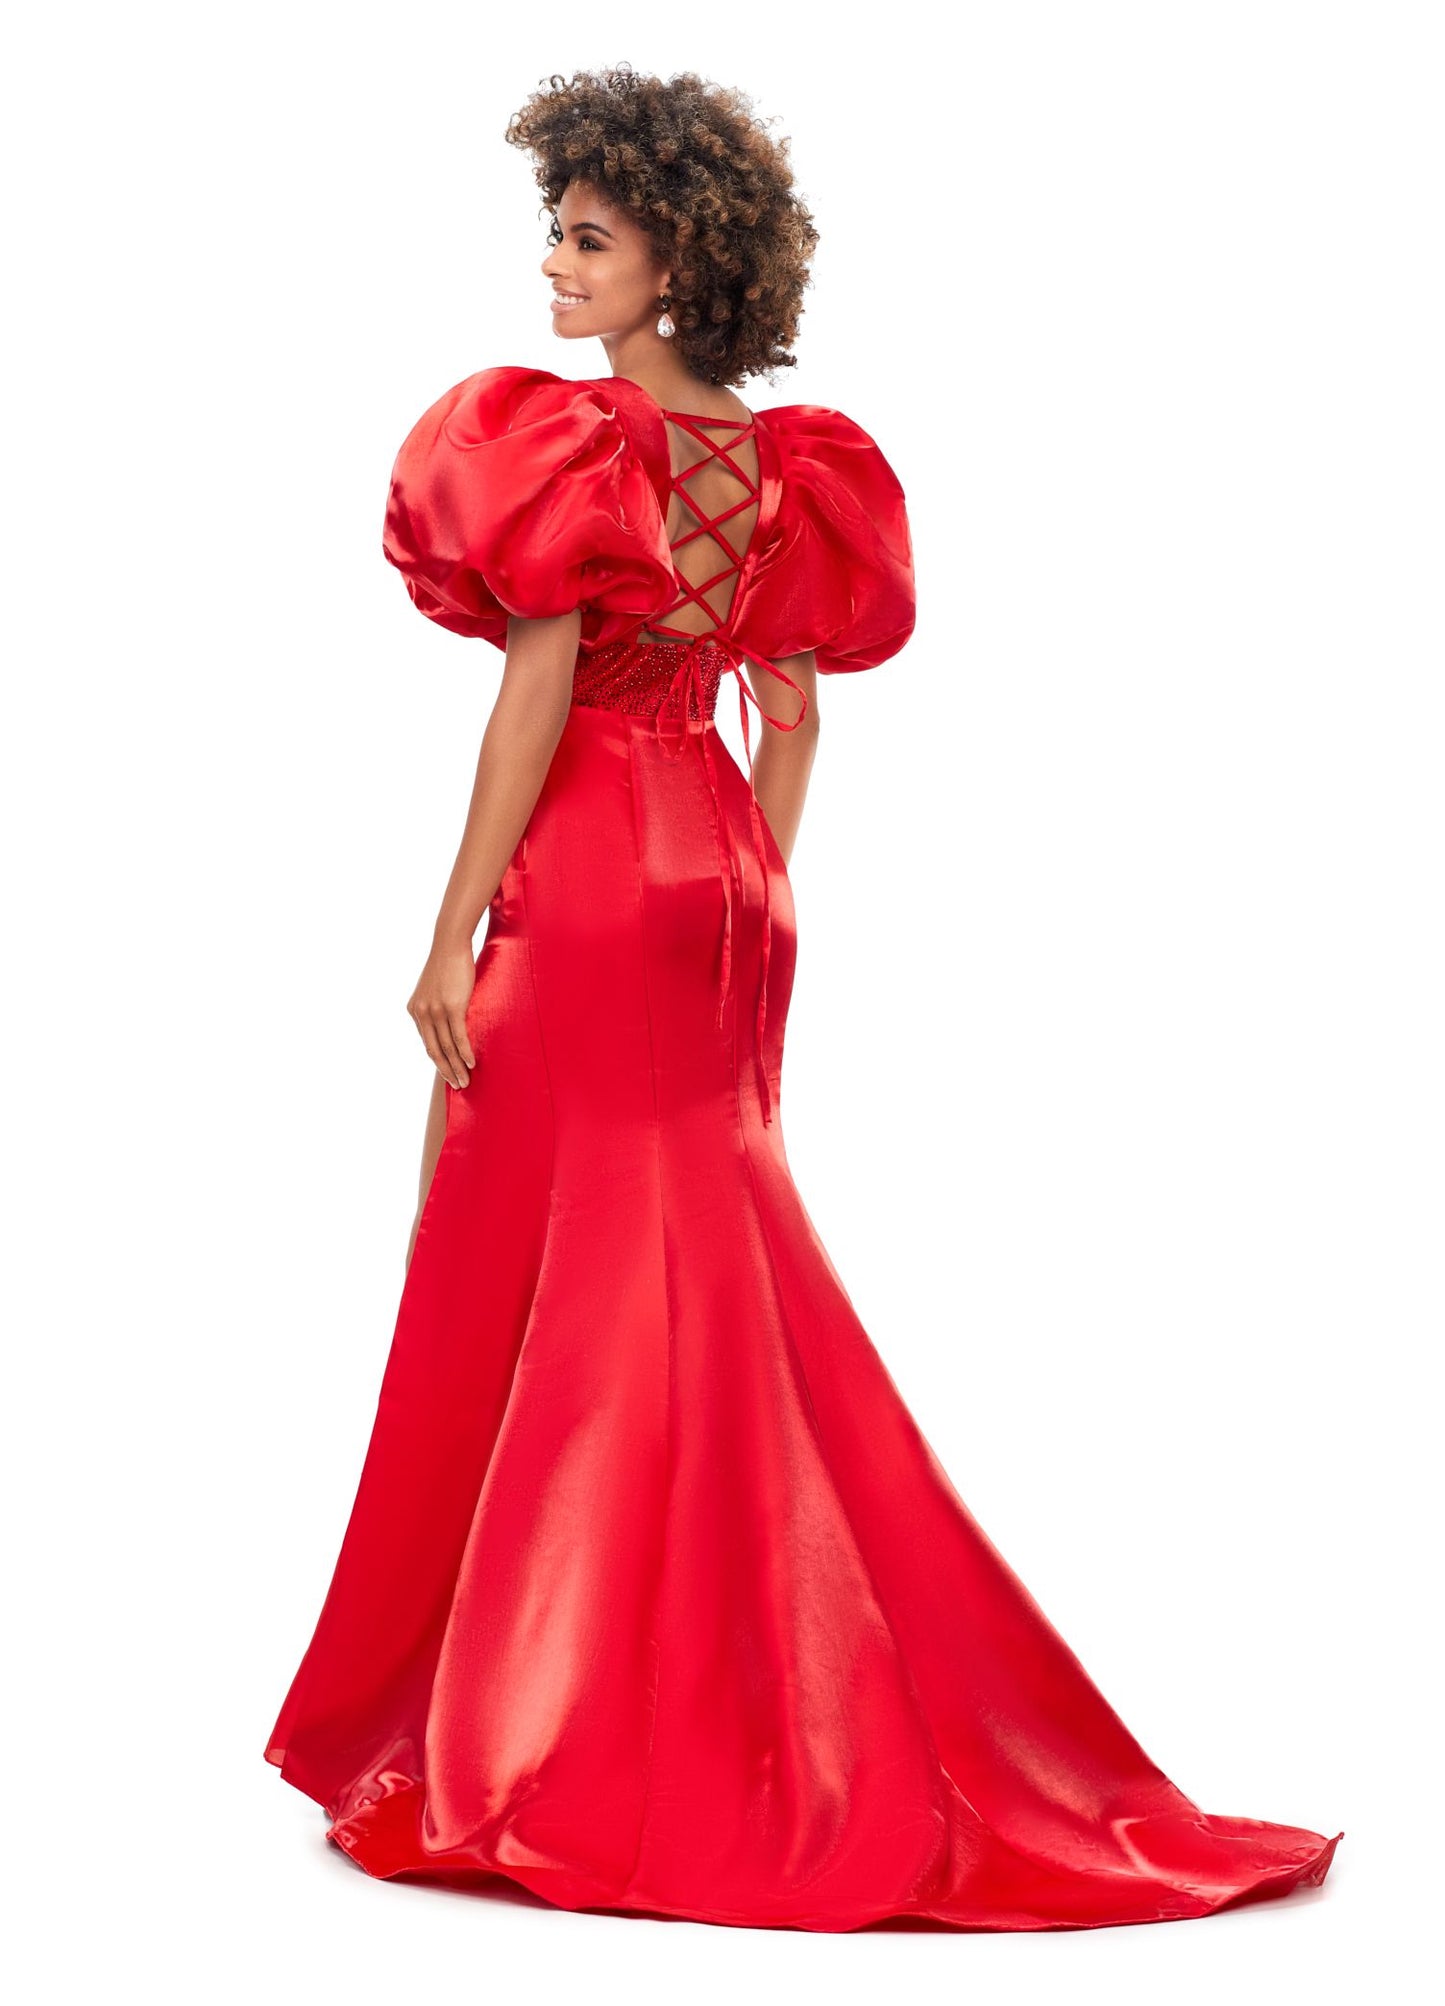 Ashley Lauren 11379 Shine in this v-neckline dress that features oversized puff sleeves. The waistband is embellished with scattered heat set stones and is complete with a lace-up back. V-Neckline Oversized Puff Sleeves Fitted Skirt Shimmer Satin COLORS: Aqua, Black, Red